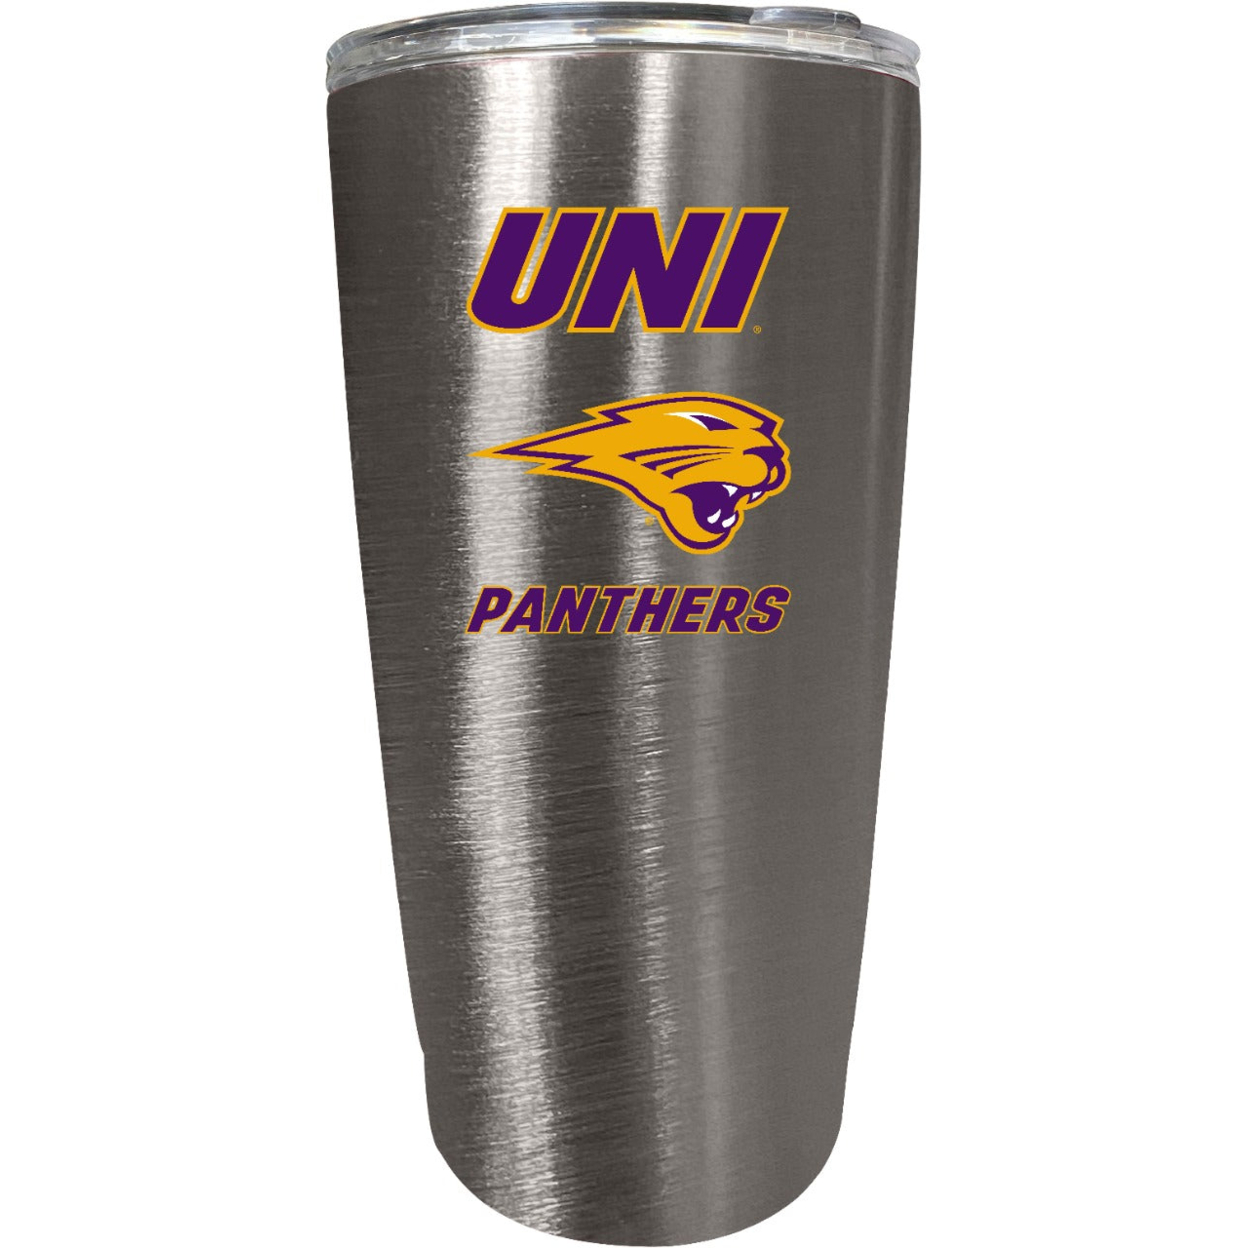 Northern Iowa Panthers 16 Oz Insulated Stainless Steel Tumbler Colorless